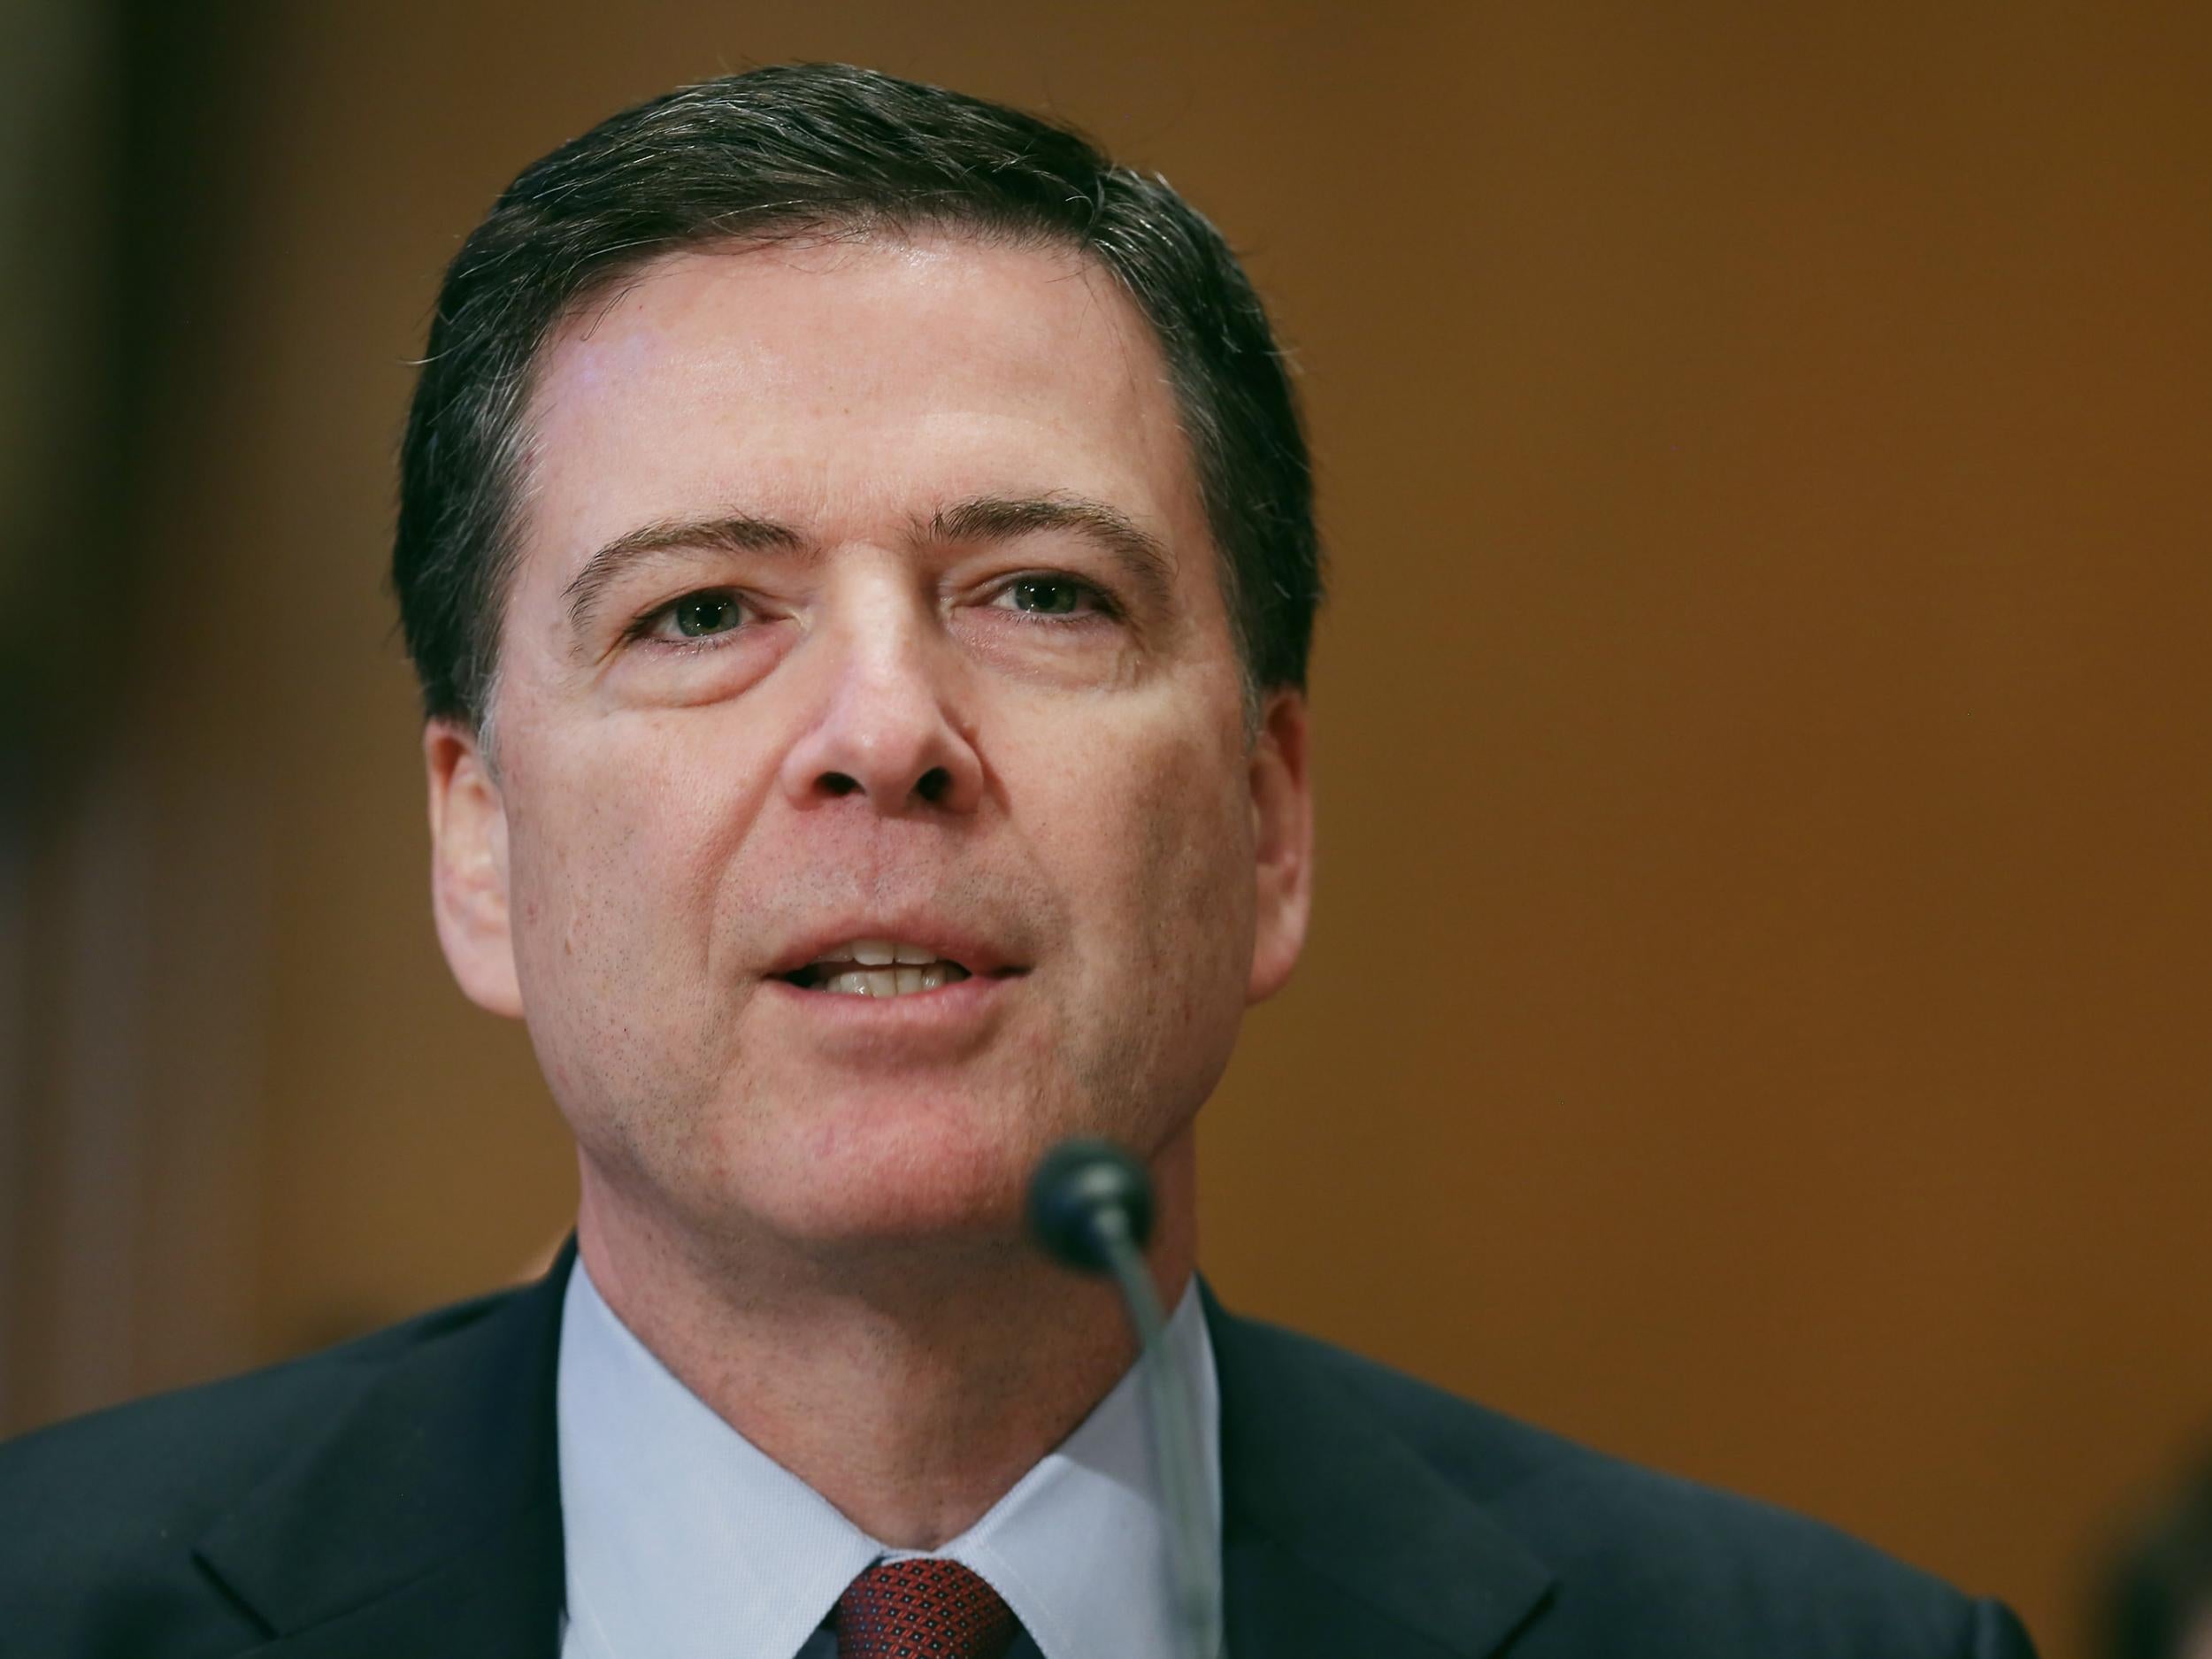 Former FBI Direction James Comey is set to testify in front of the Senate Intelligence Committee on 8 June